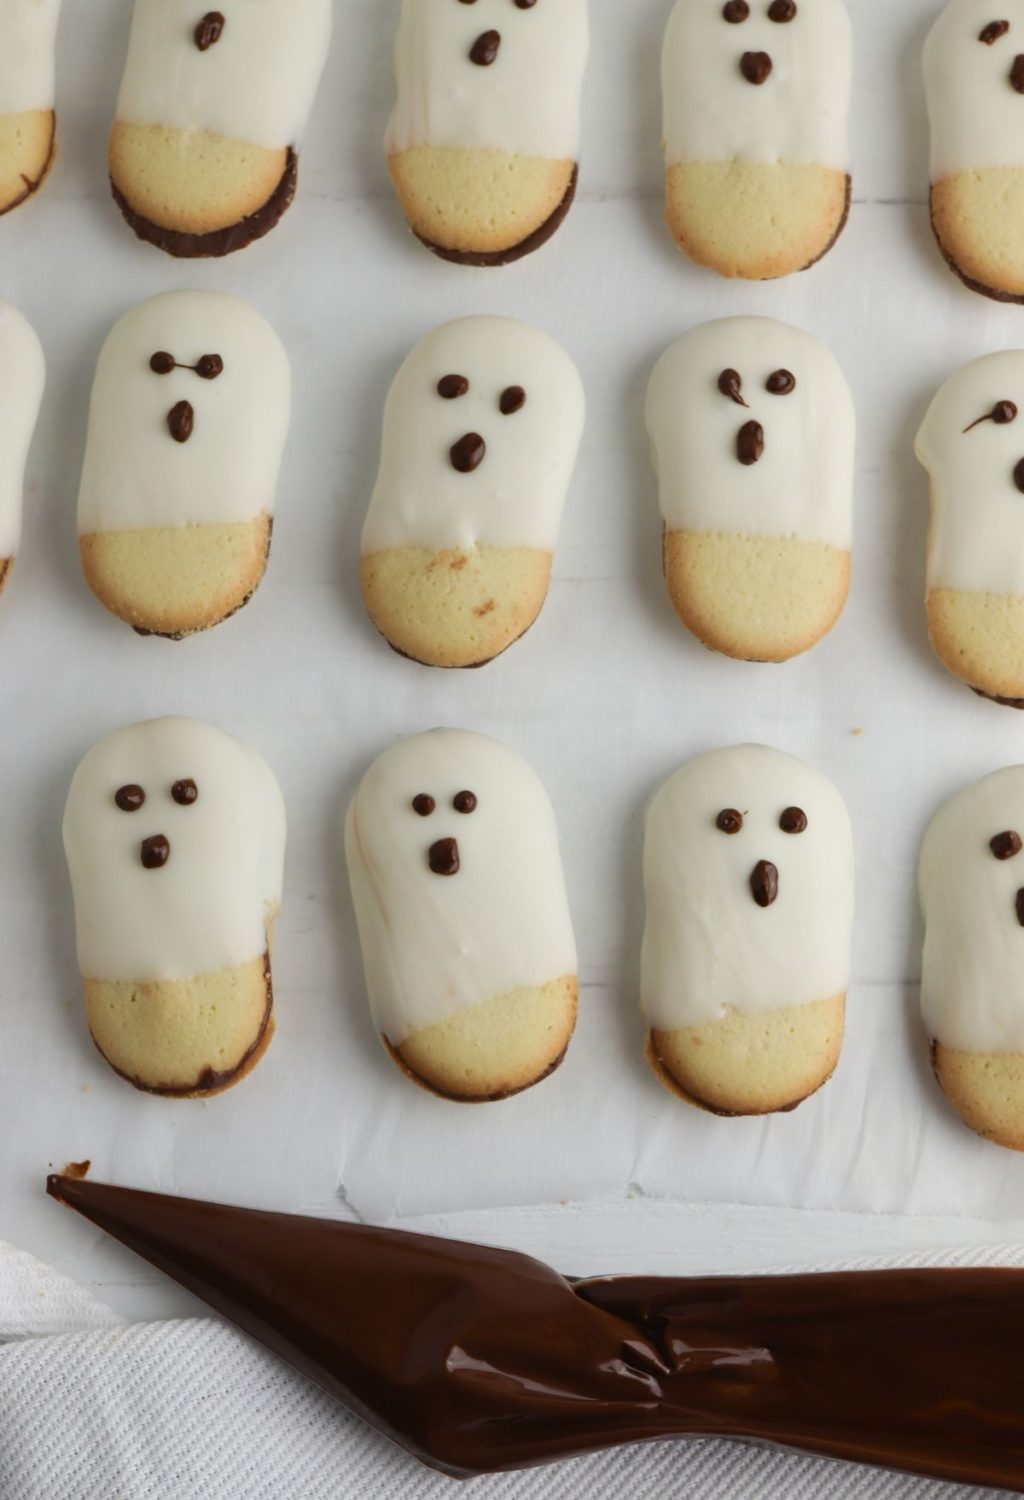 Ghost cookies on a baking sheet with icing and a knife.